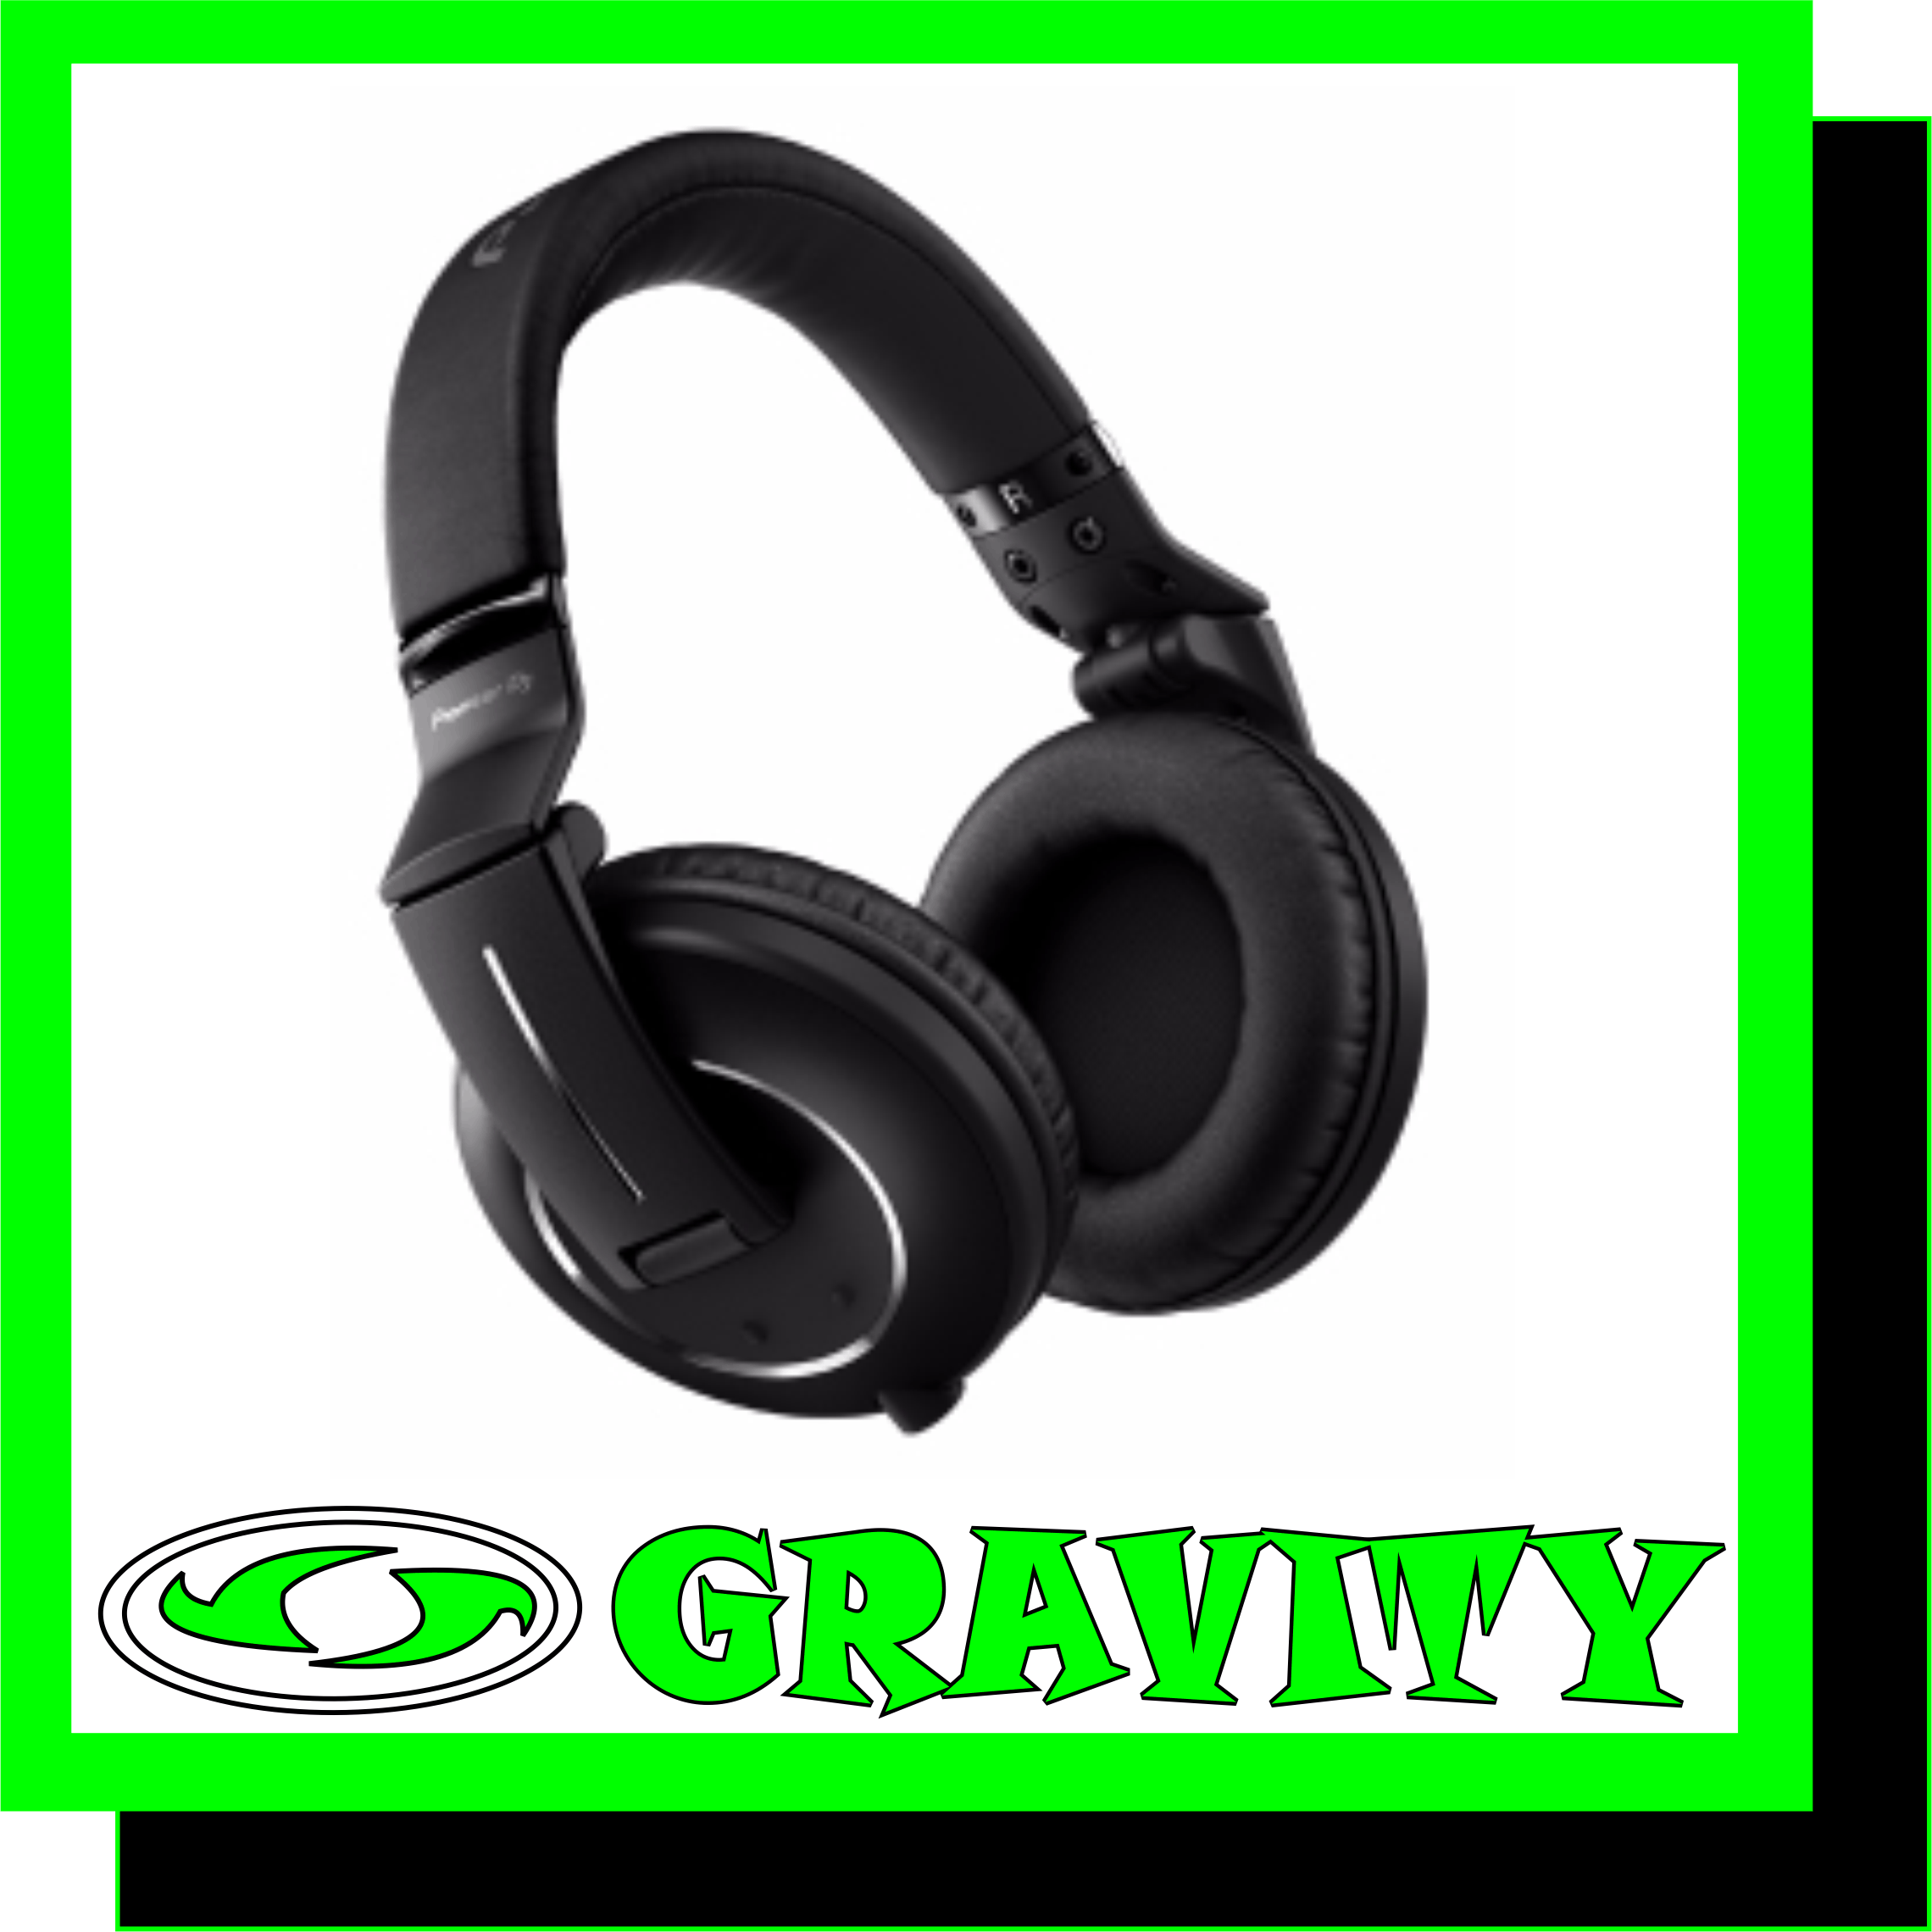 HDJ2000MK2-K @ R6 000.00  Flagship Professional DJ Headphones  High-fidelity sound design optimized for all DJs Improved air chamber for better sound isolation Durable, ergonomic headband design L-shaped headphone plug with coiled and straight cords Stylish and compact protective 